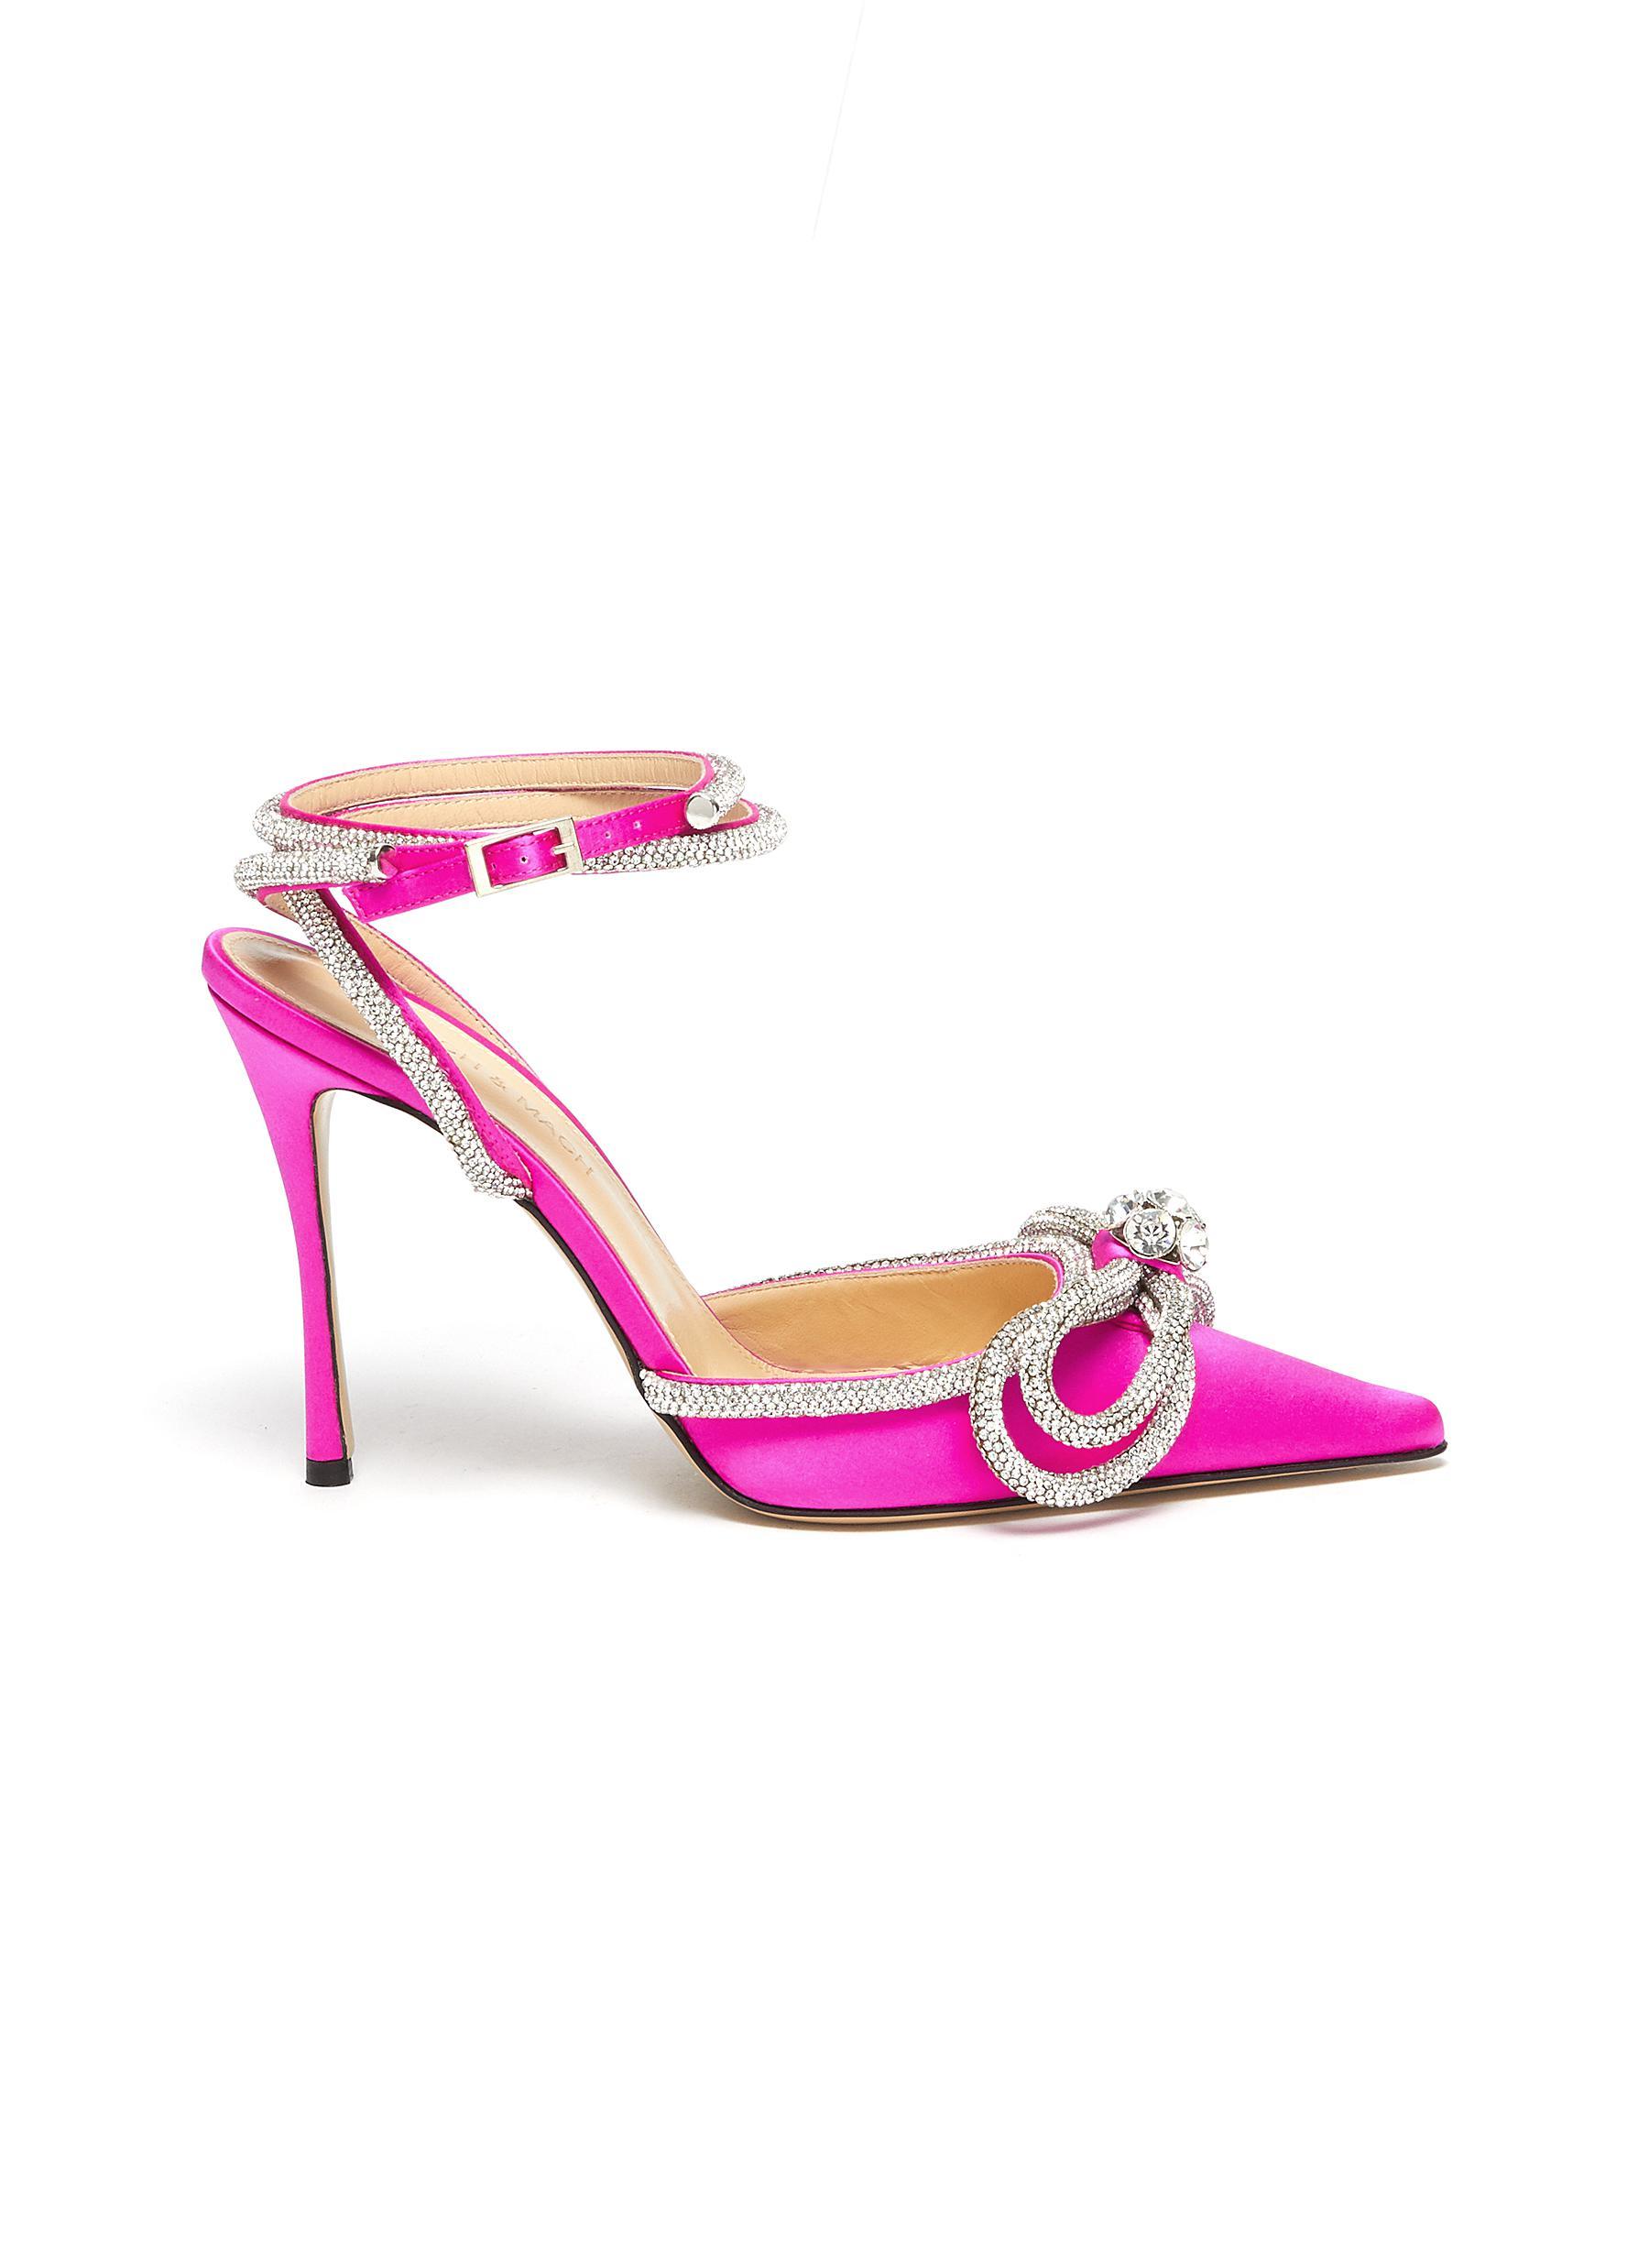 Mach & Mach Double Crystal Bow Satin Pumps in Pink | Lyst